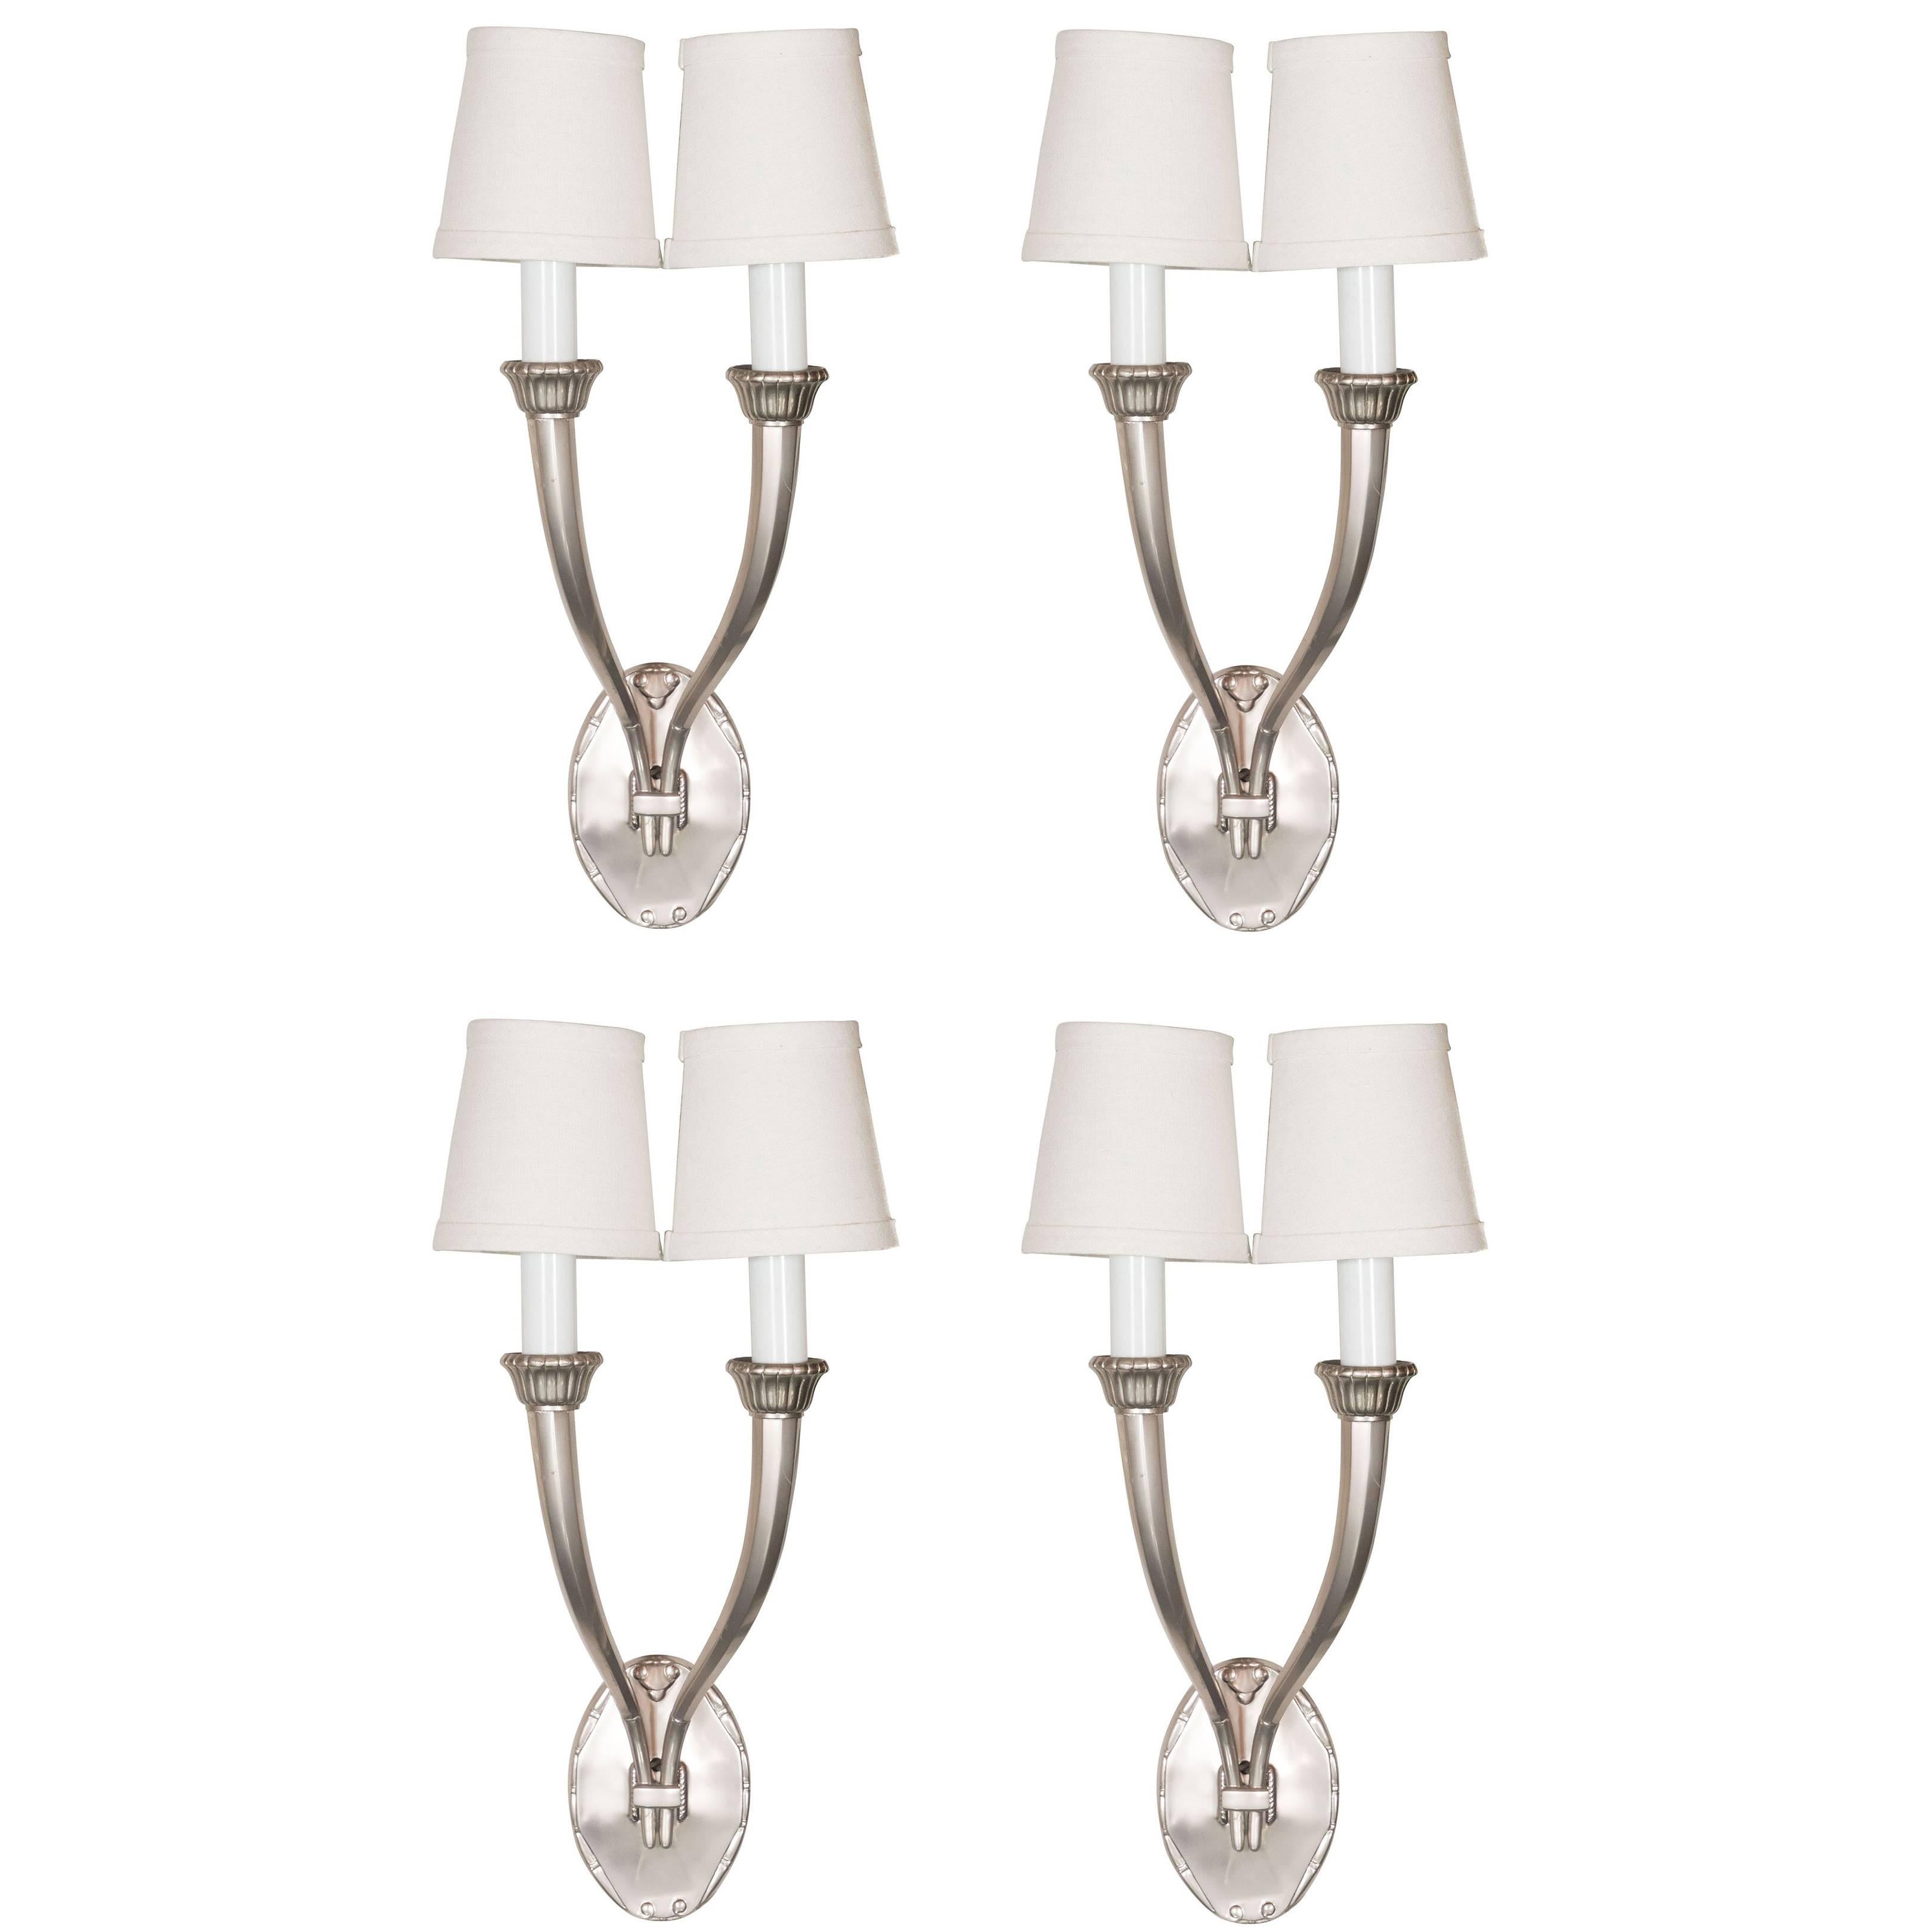 Set of Four French Art Deco Brushed Nickel Sconces in the Manner of Paul Kiss